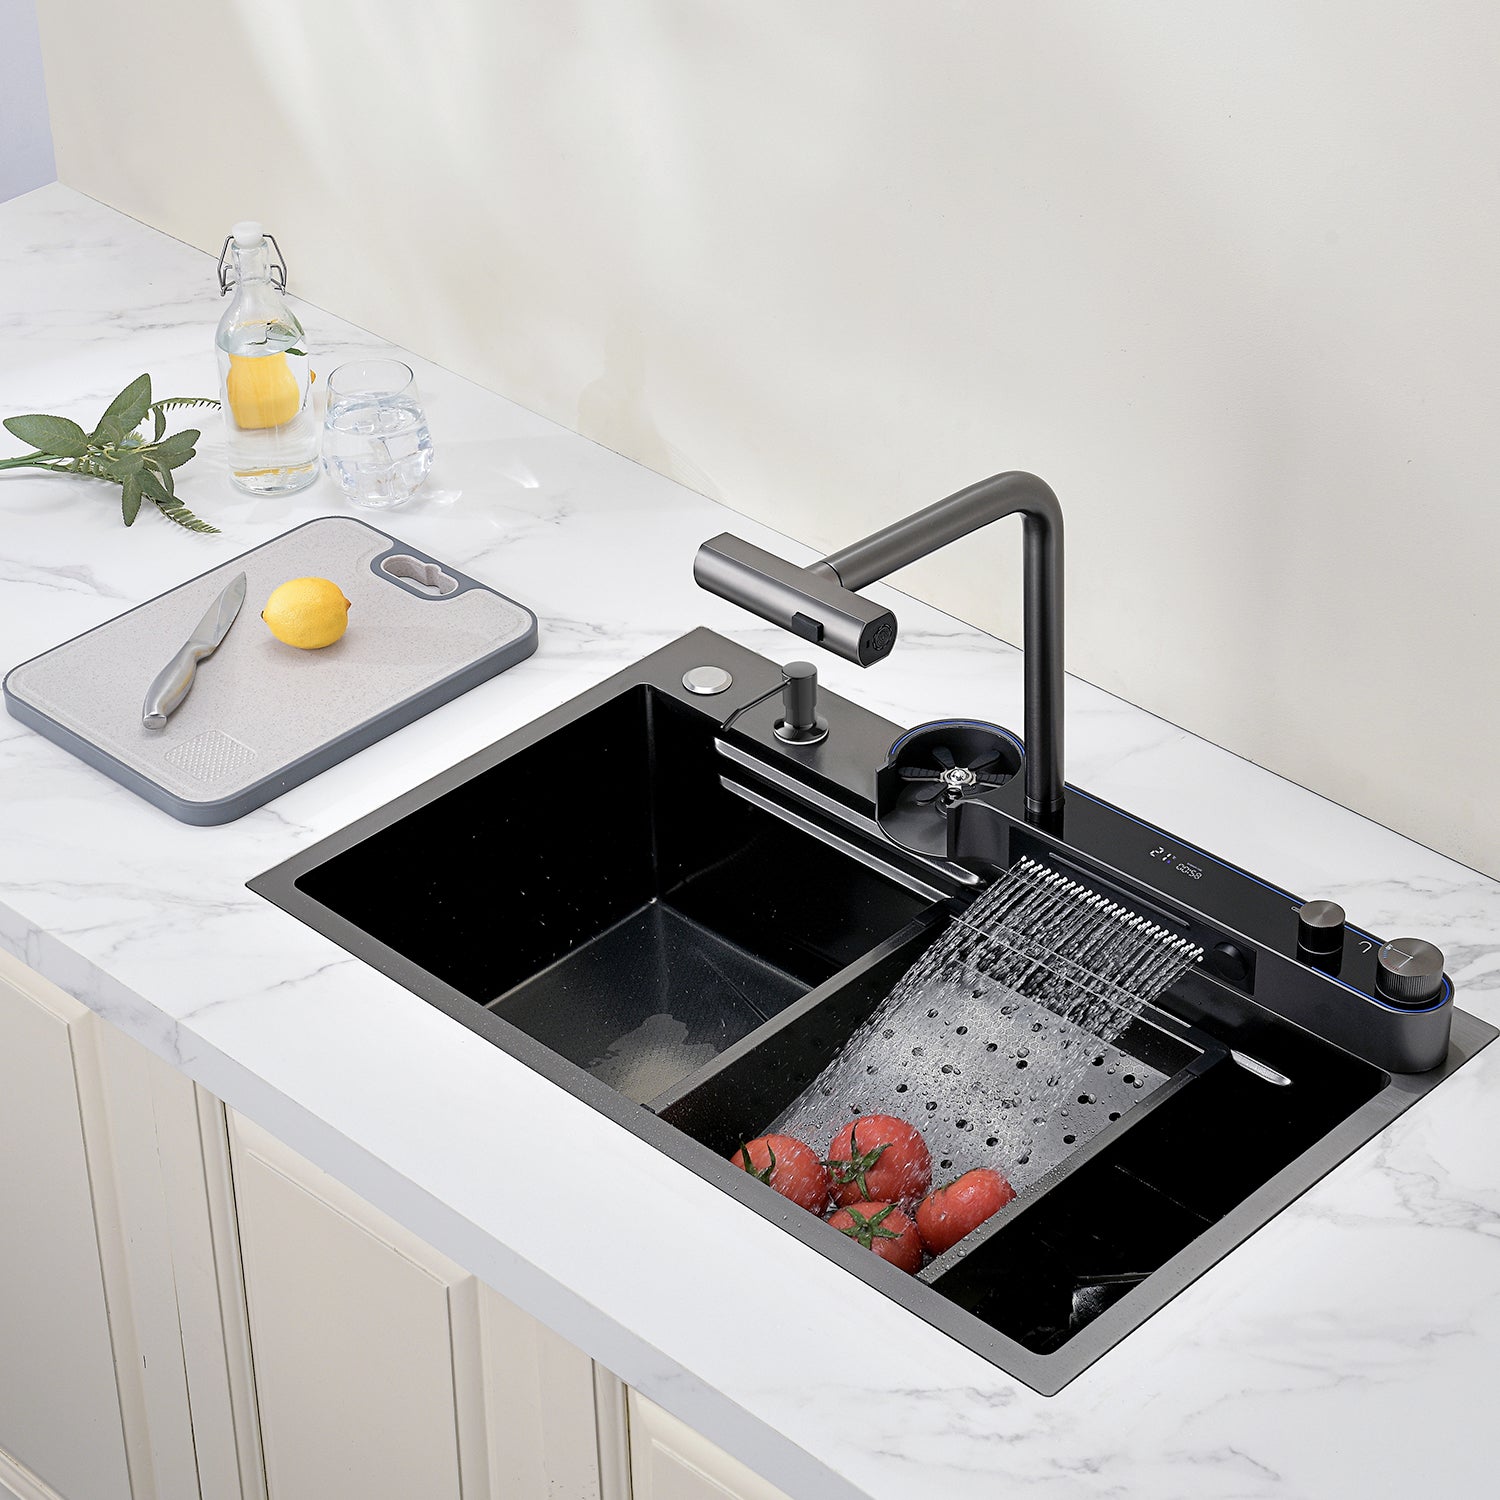 Lefton Two Outlets Waterfall Faucet Kitchen Sink with Digital Temperature Display & LED Lighting-KS2208 -Kitchen Sinks- Lefton Home